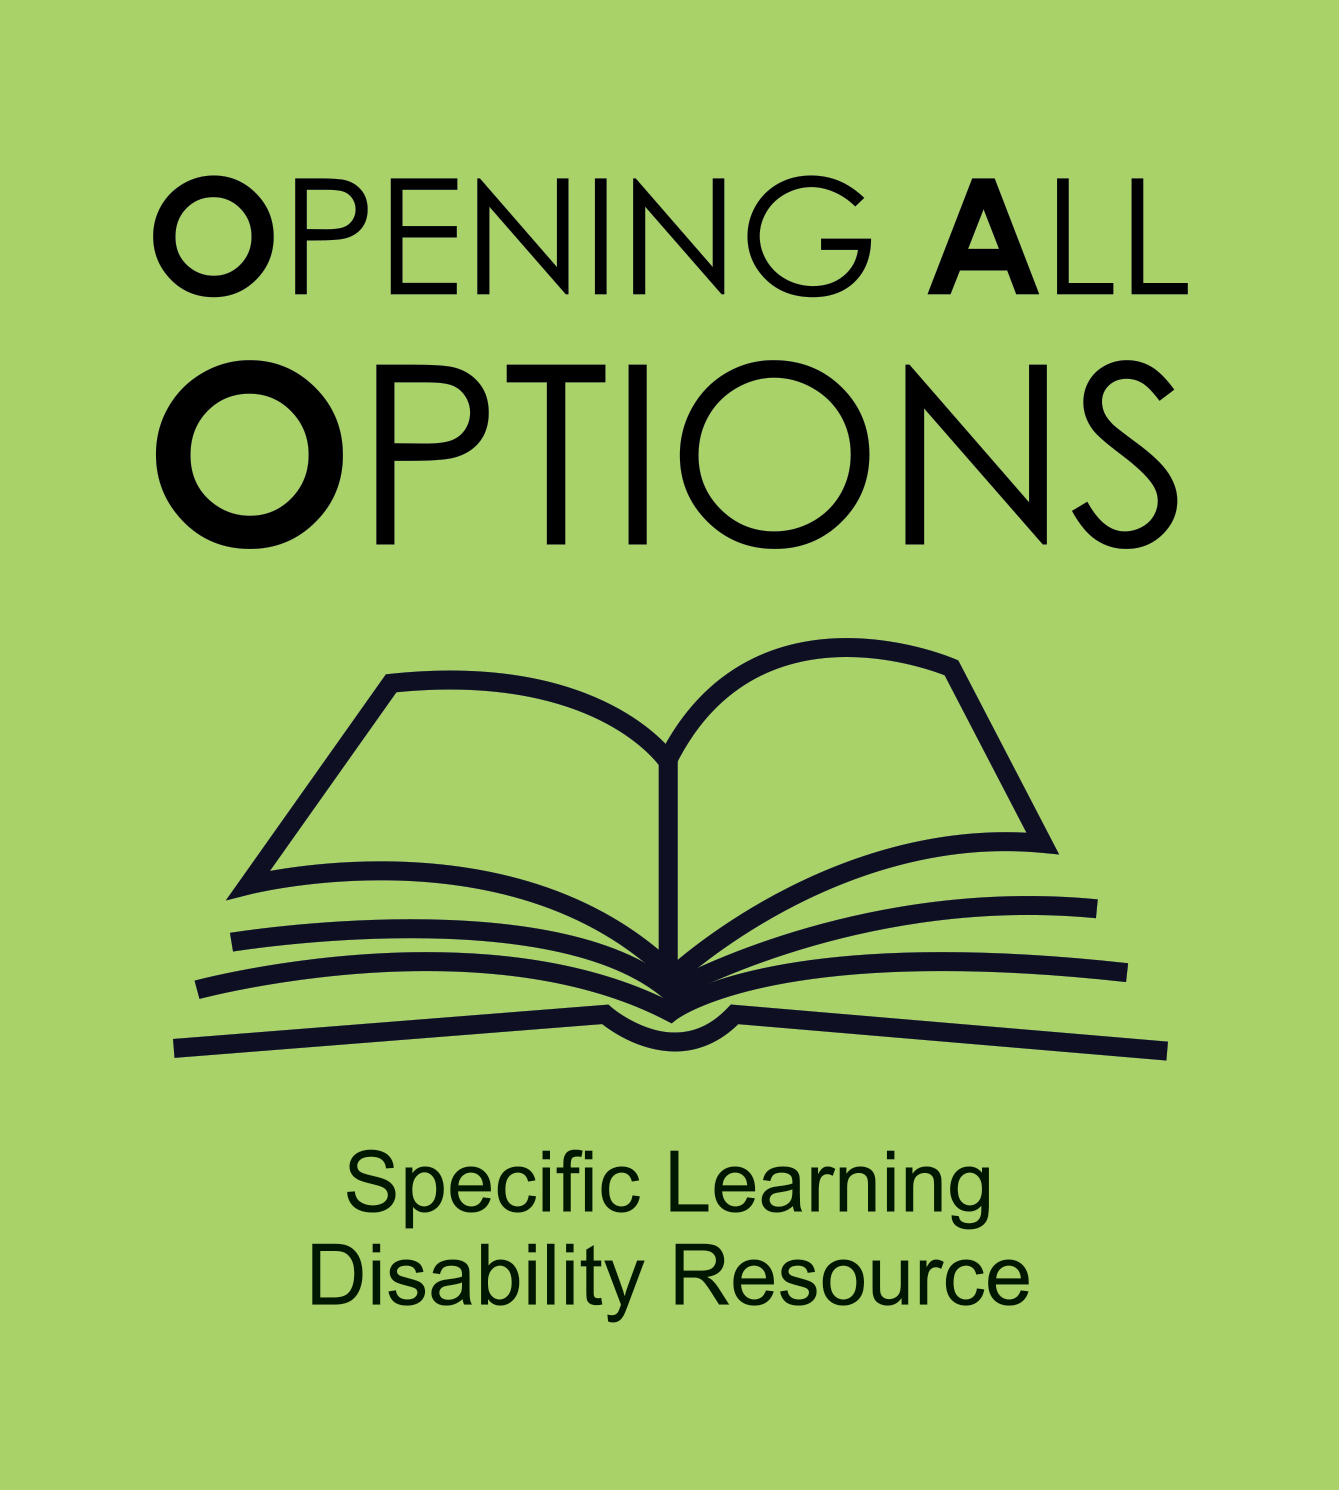 OAO Opeing all Options logo